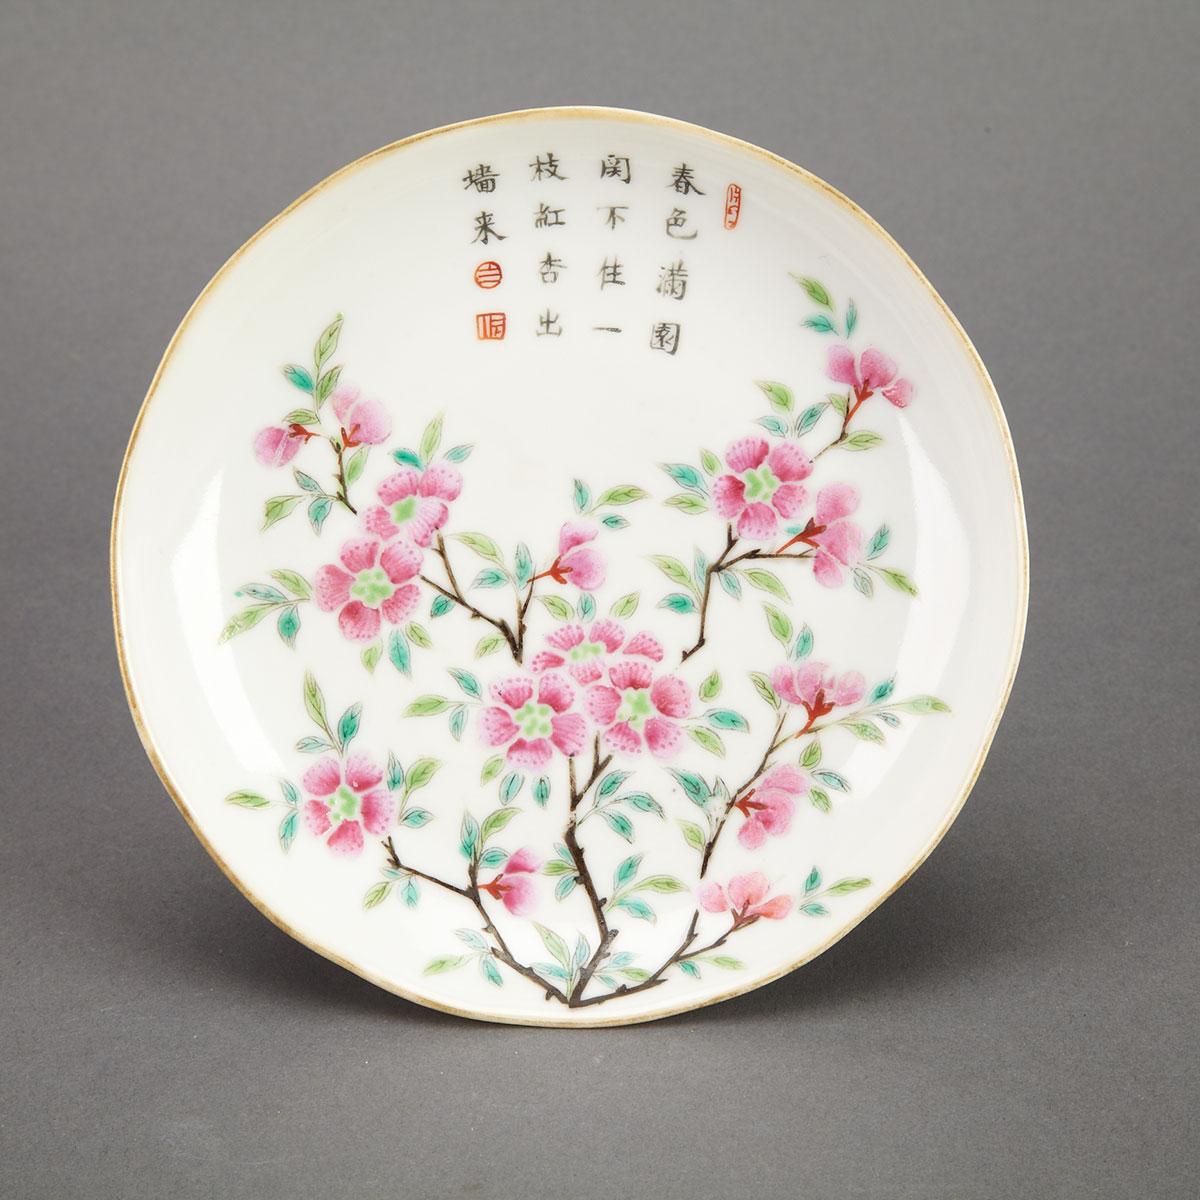 Small Famille Rose Dish, Daoguang Mark, Circa 1900 or Earlier